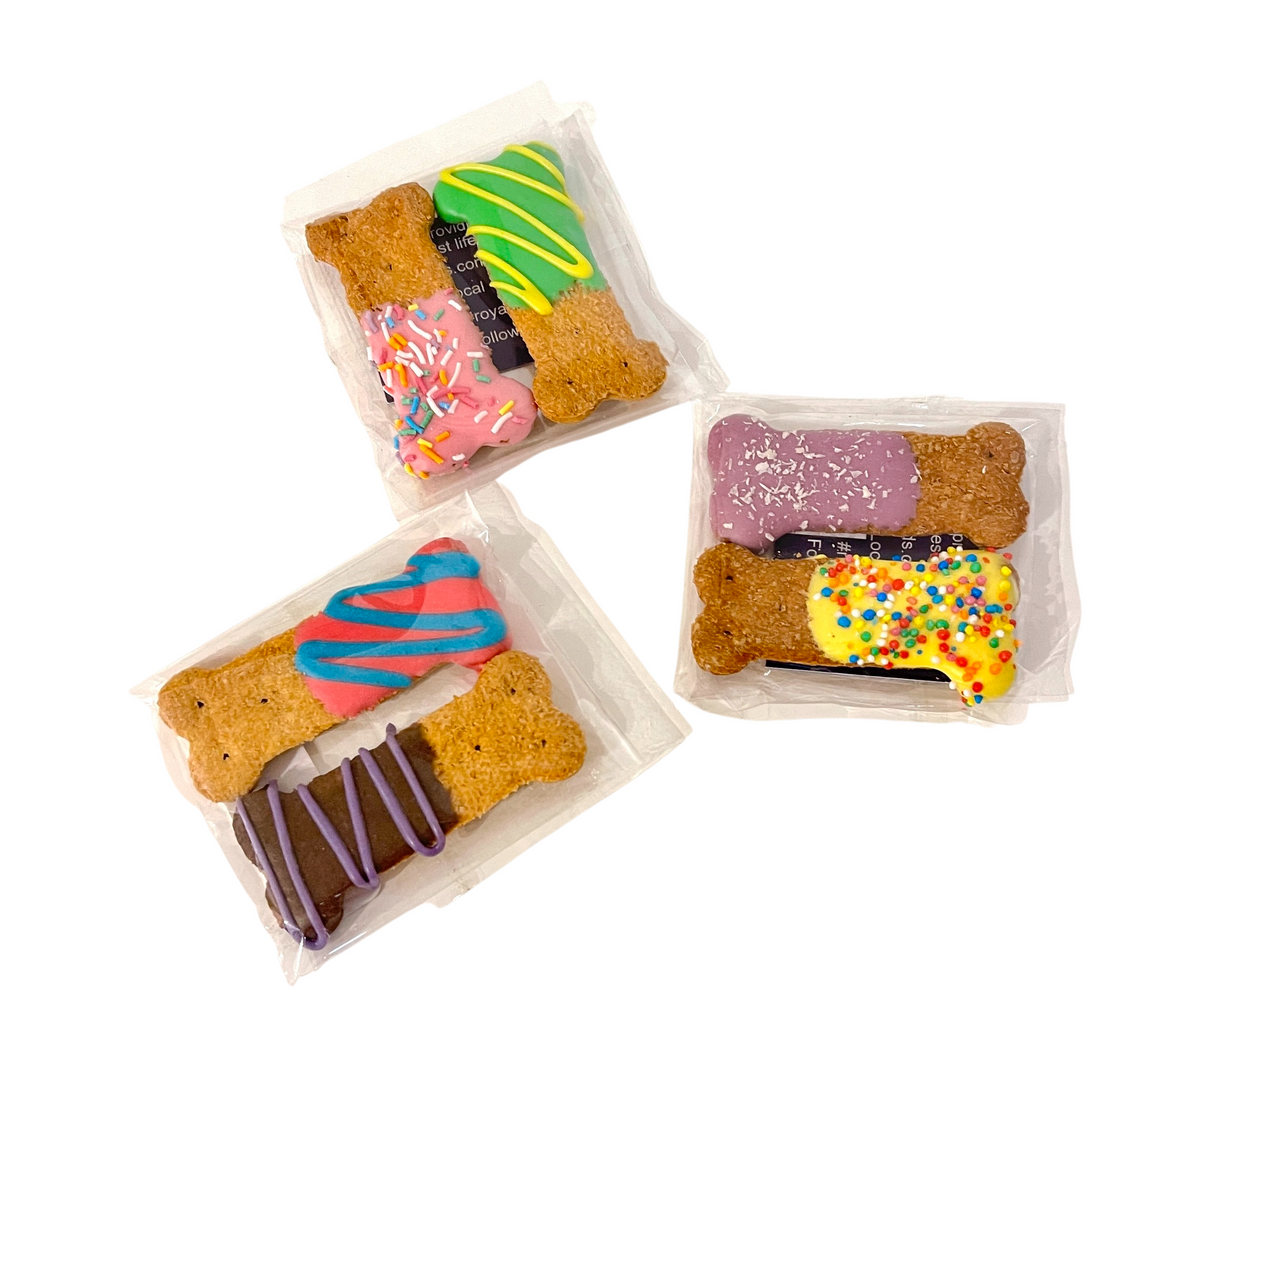 2-Pack of Iced Dog Treats